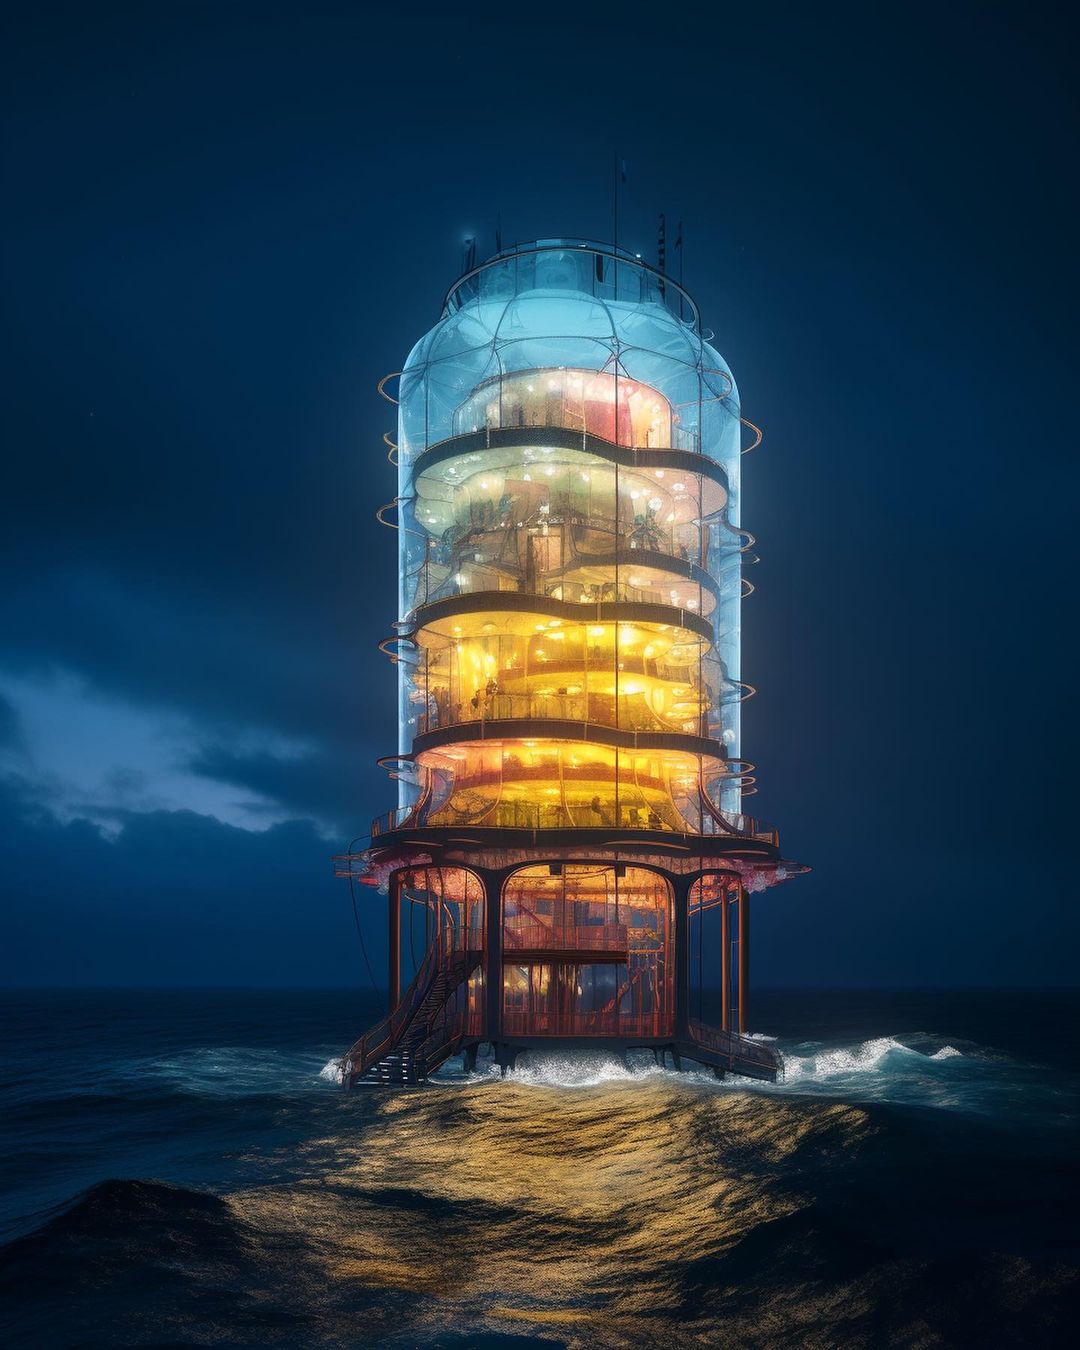 Futuristic transparent building in the middle of the ocean by Shail Patel